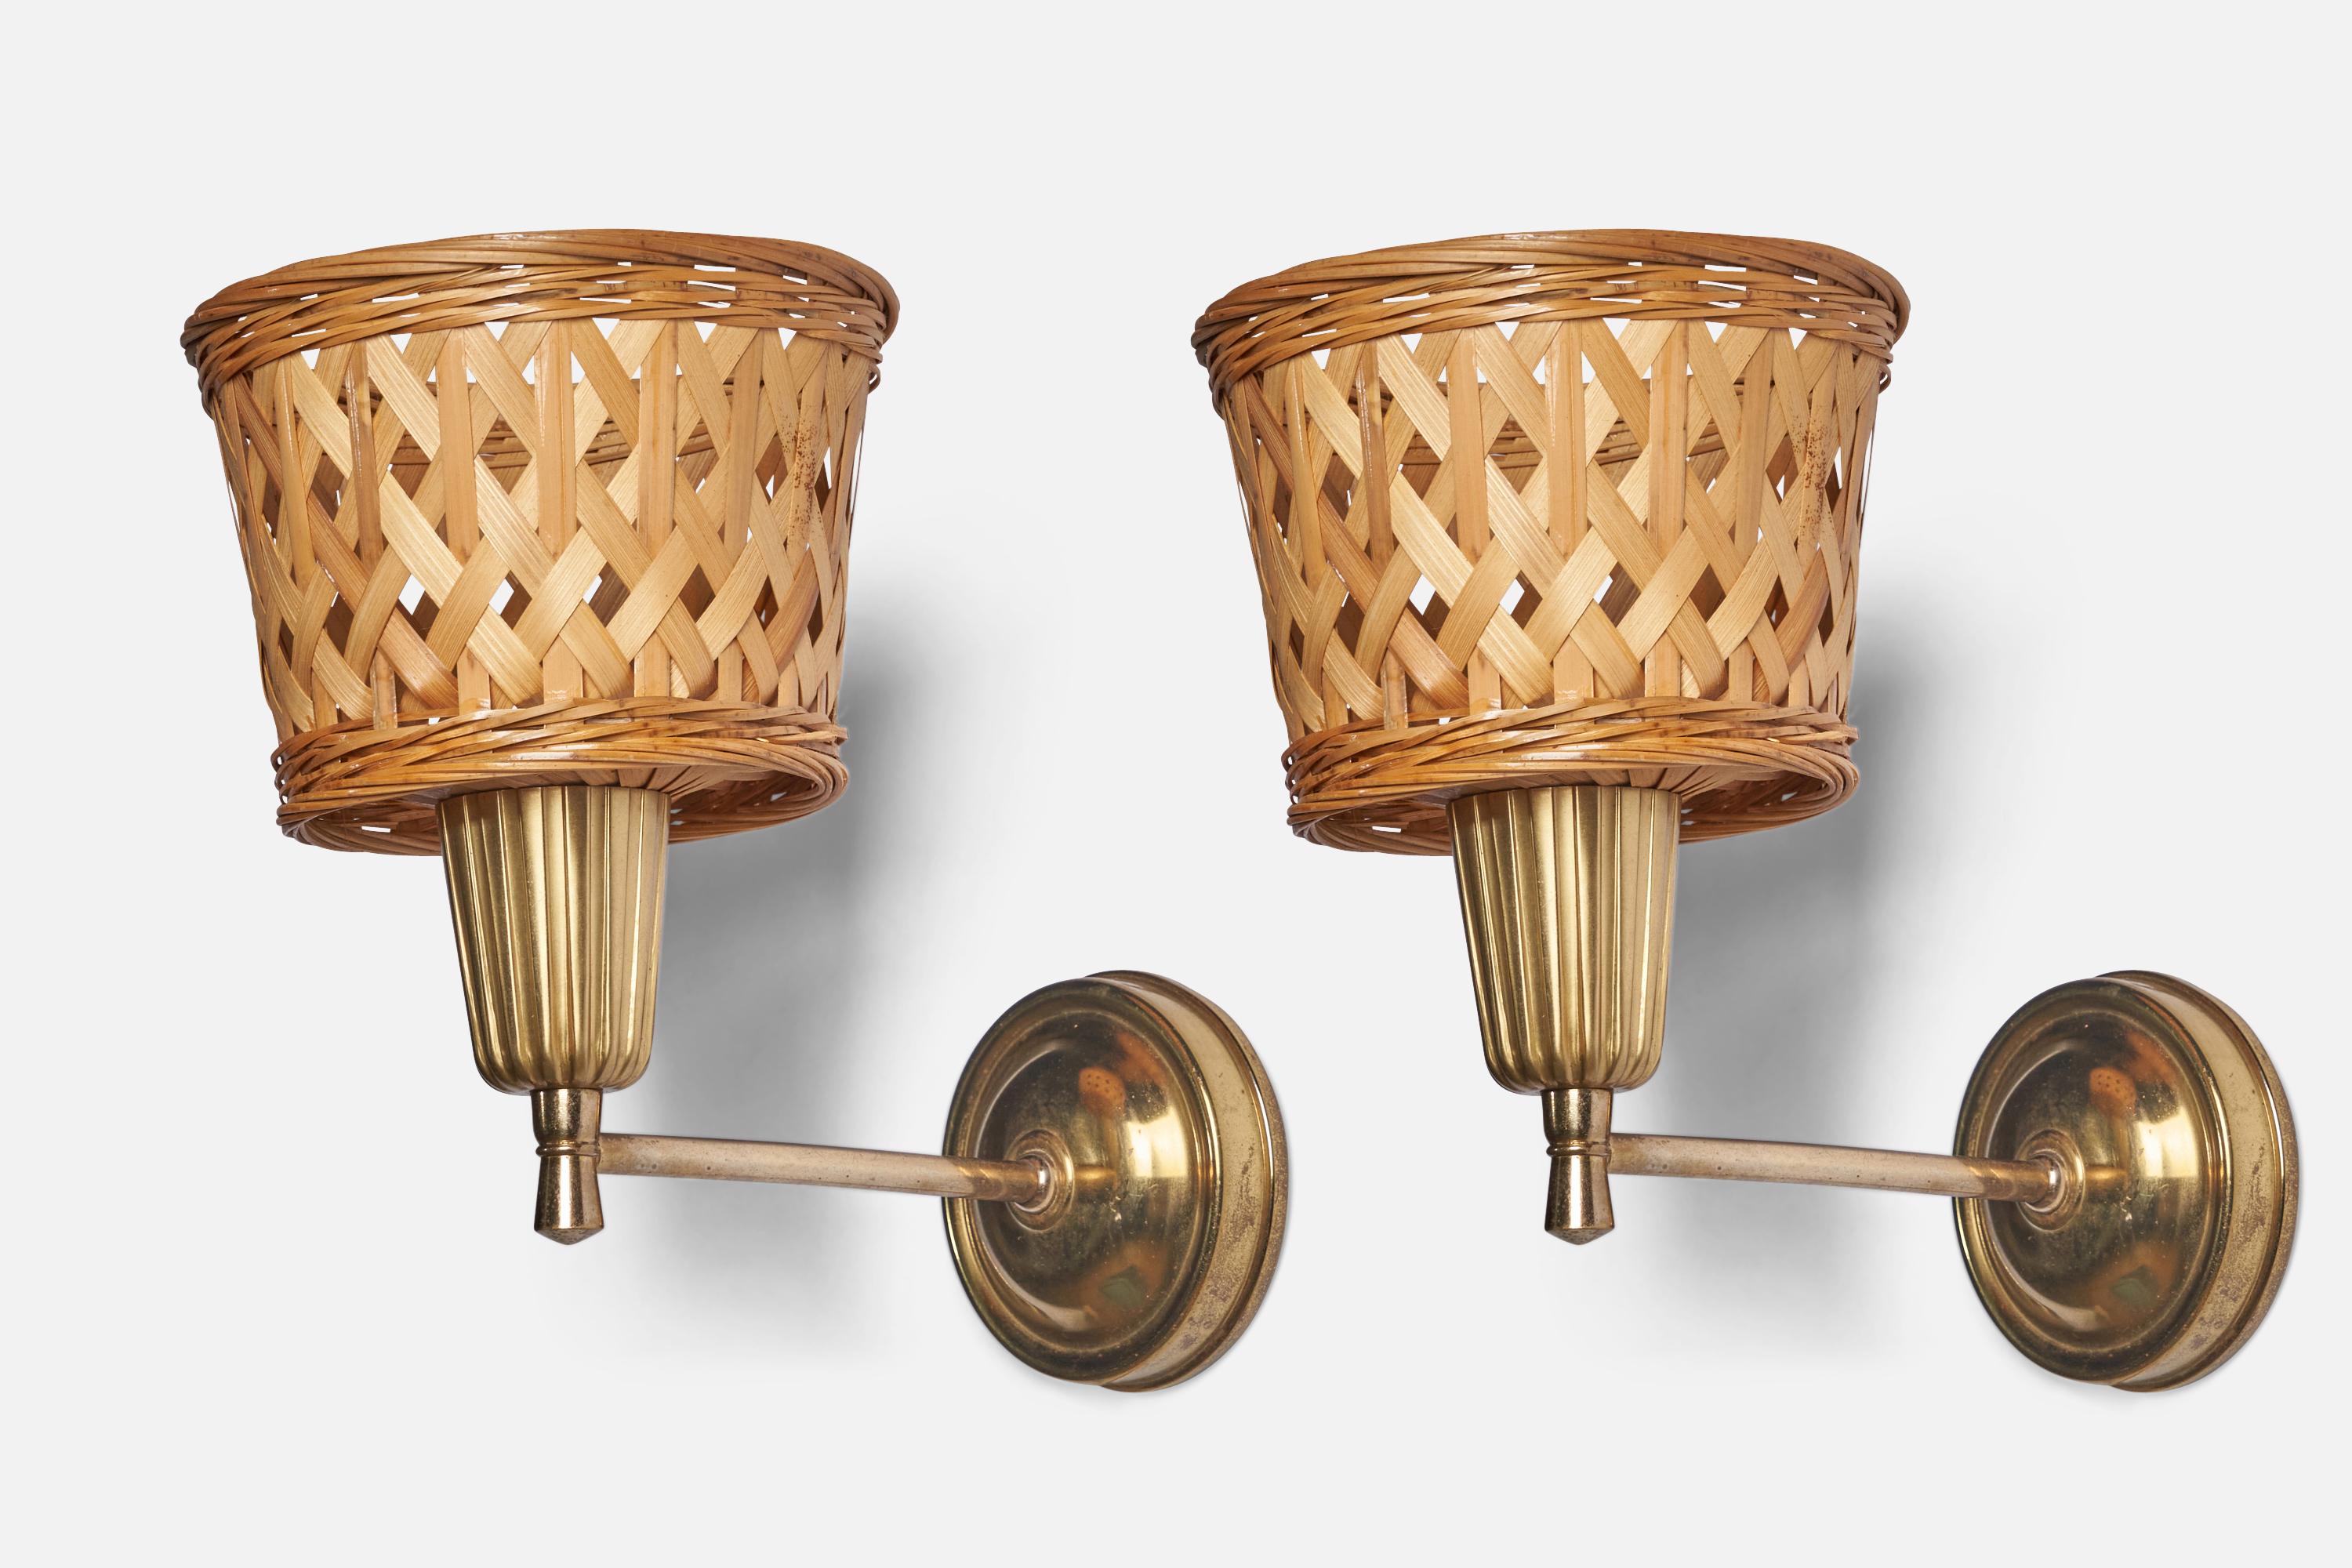 A pair of brass and rattan wall lights designed and produced in Sweden, c. 1970s.

Overall Dimensions: 9.5